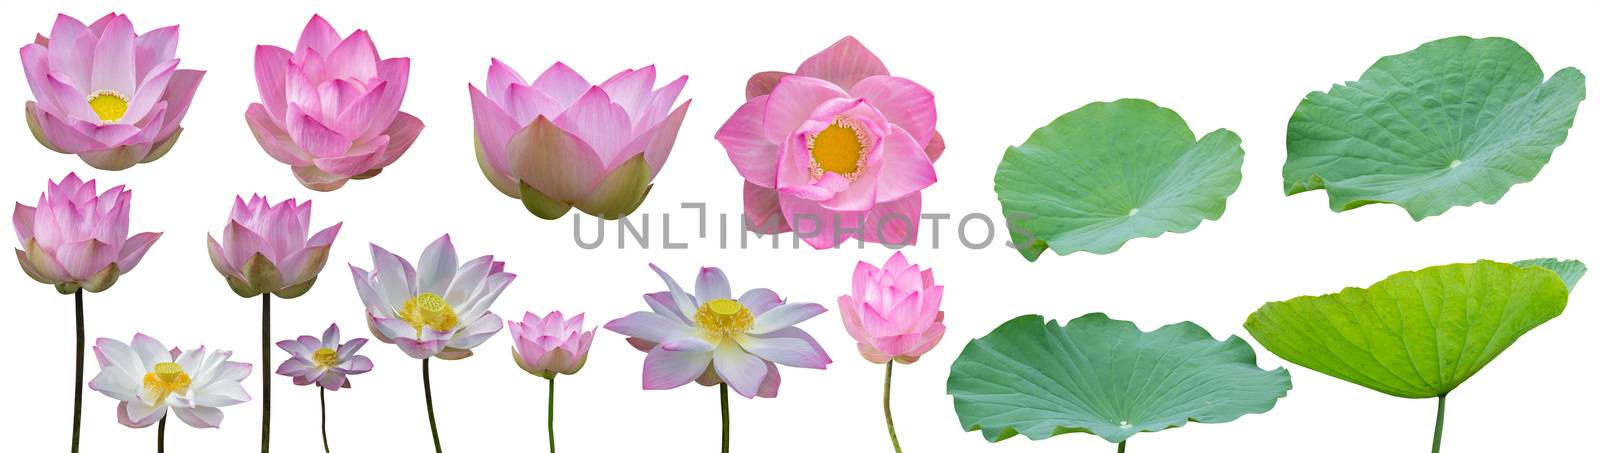 Isolated, lotus flower and lotus leaves set on white background. Clipping path